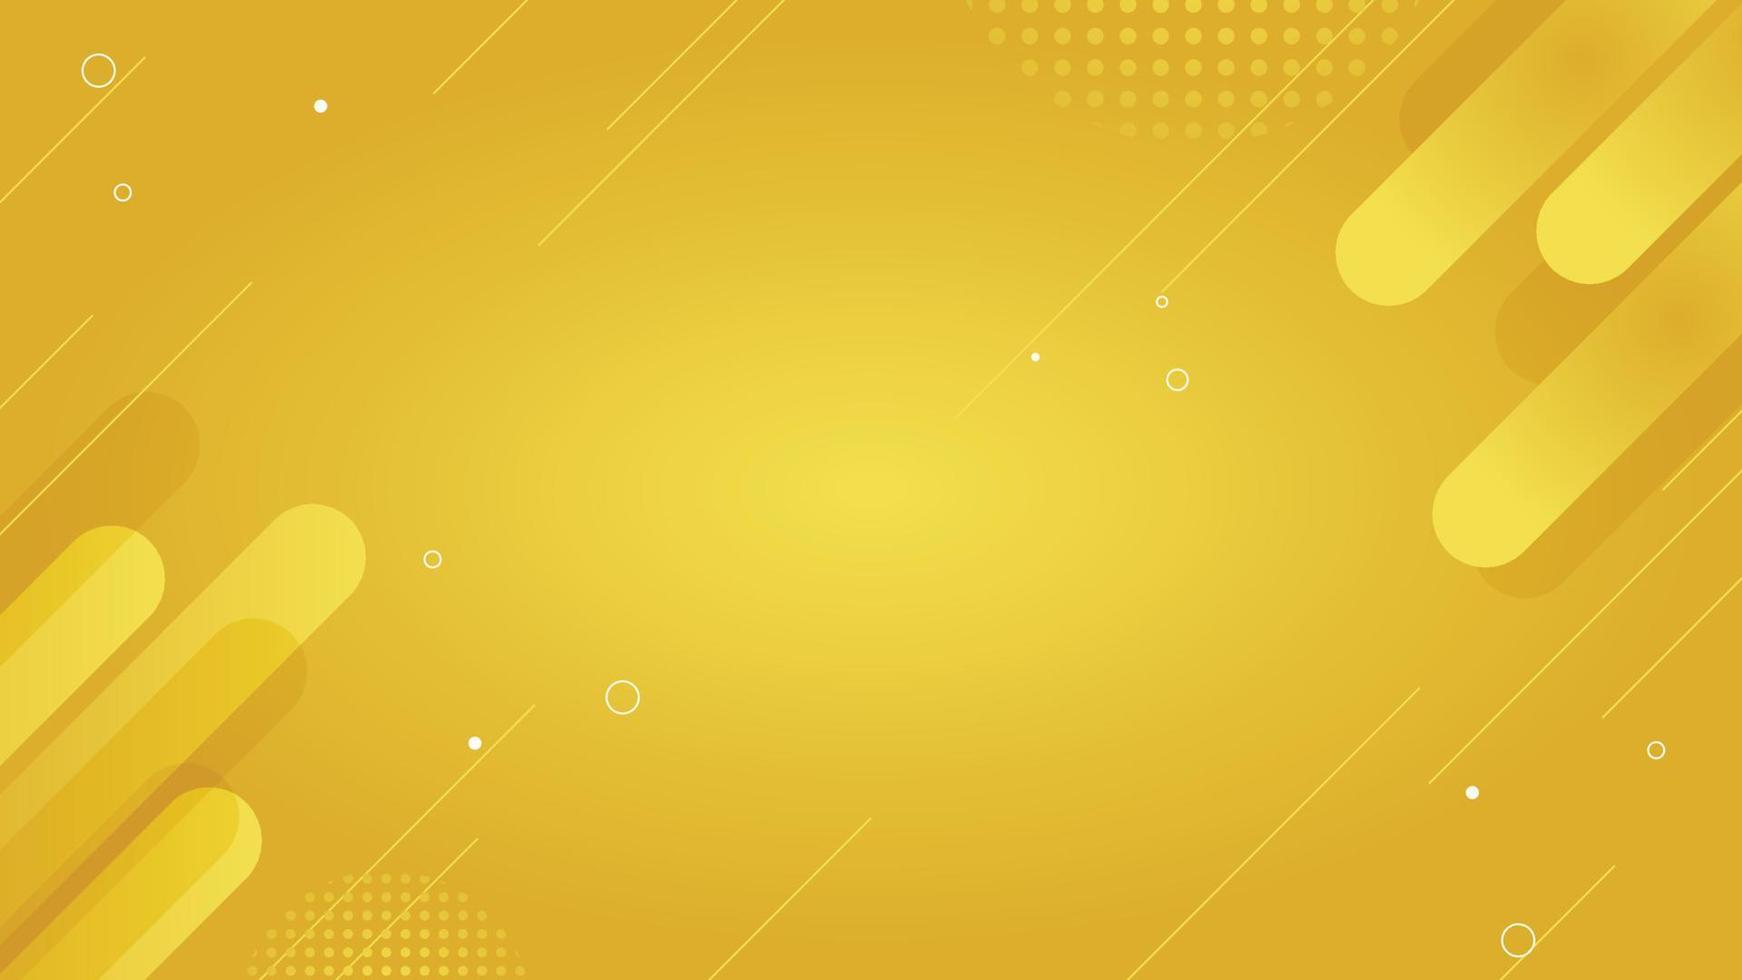 Abstract Background illustration. yellow abstract background with simple shape. vector